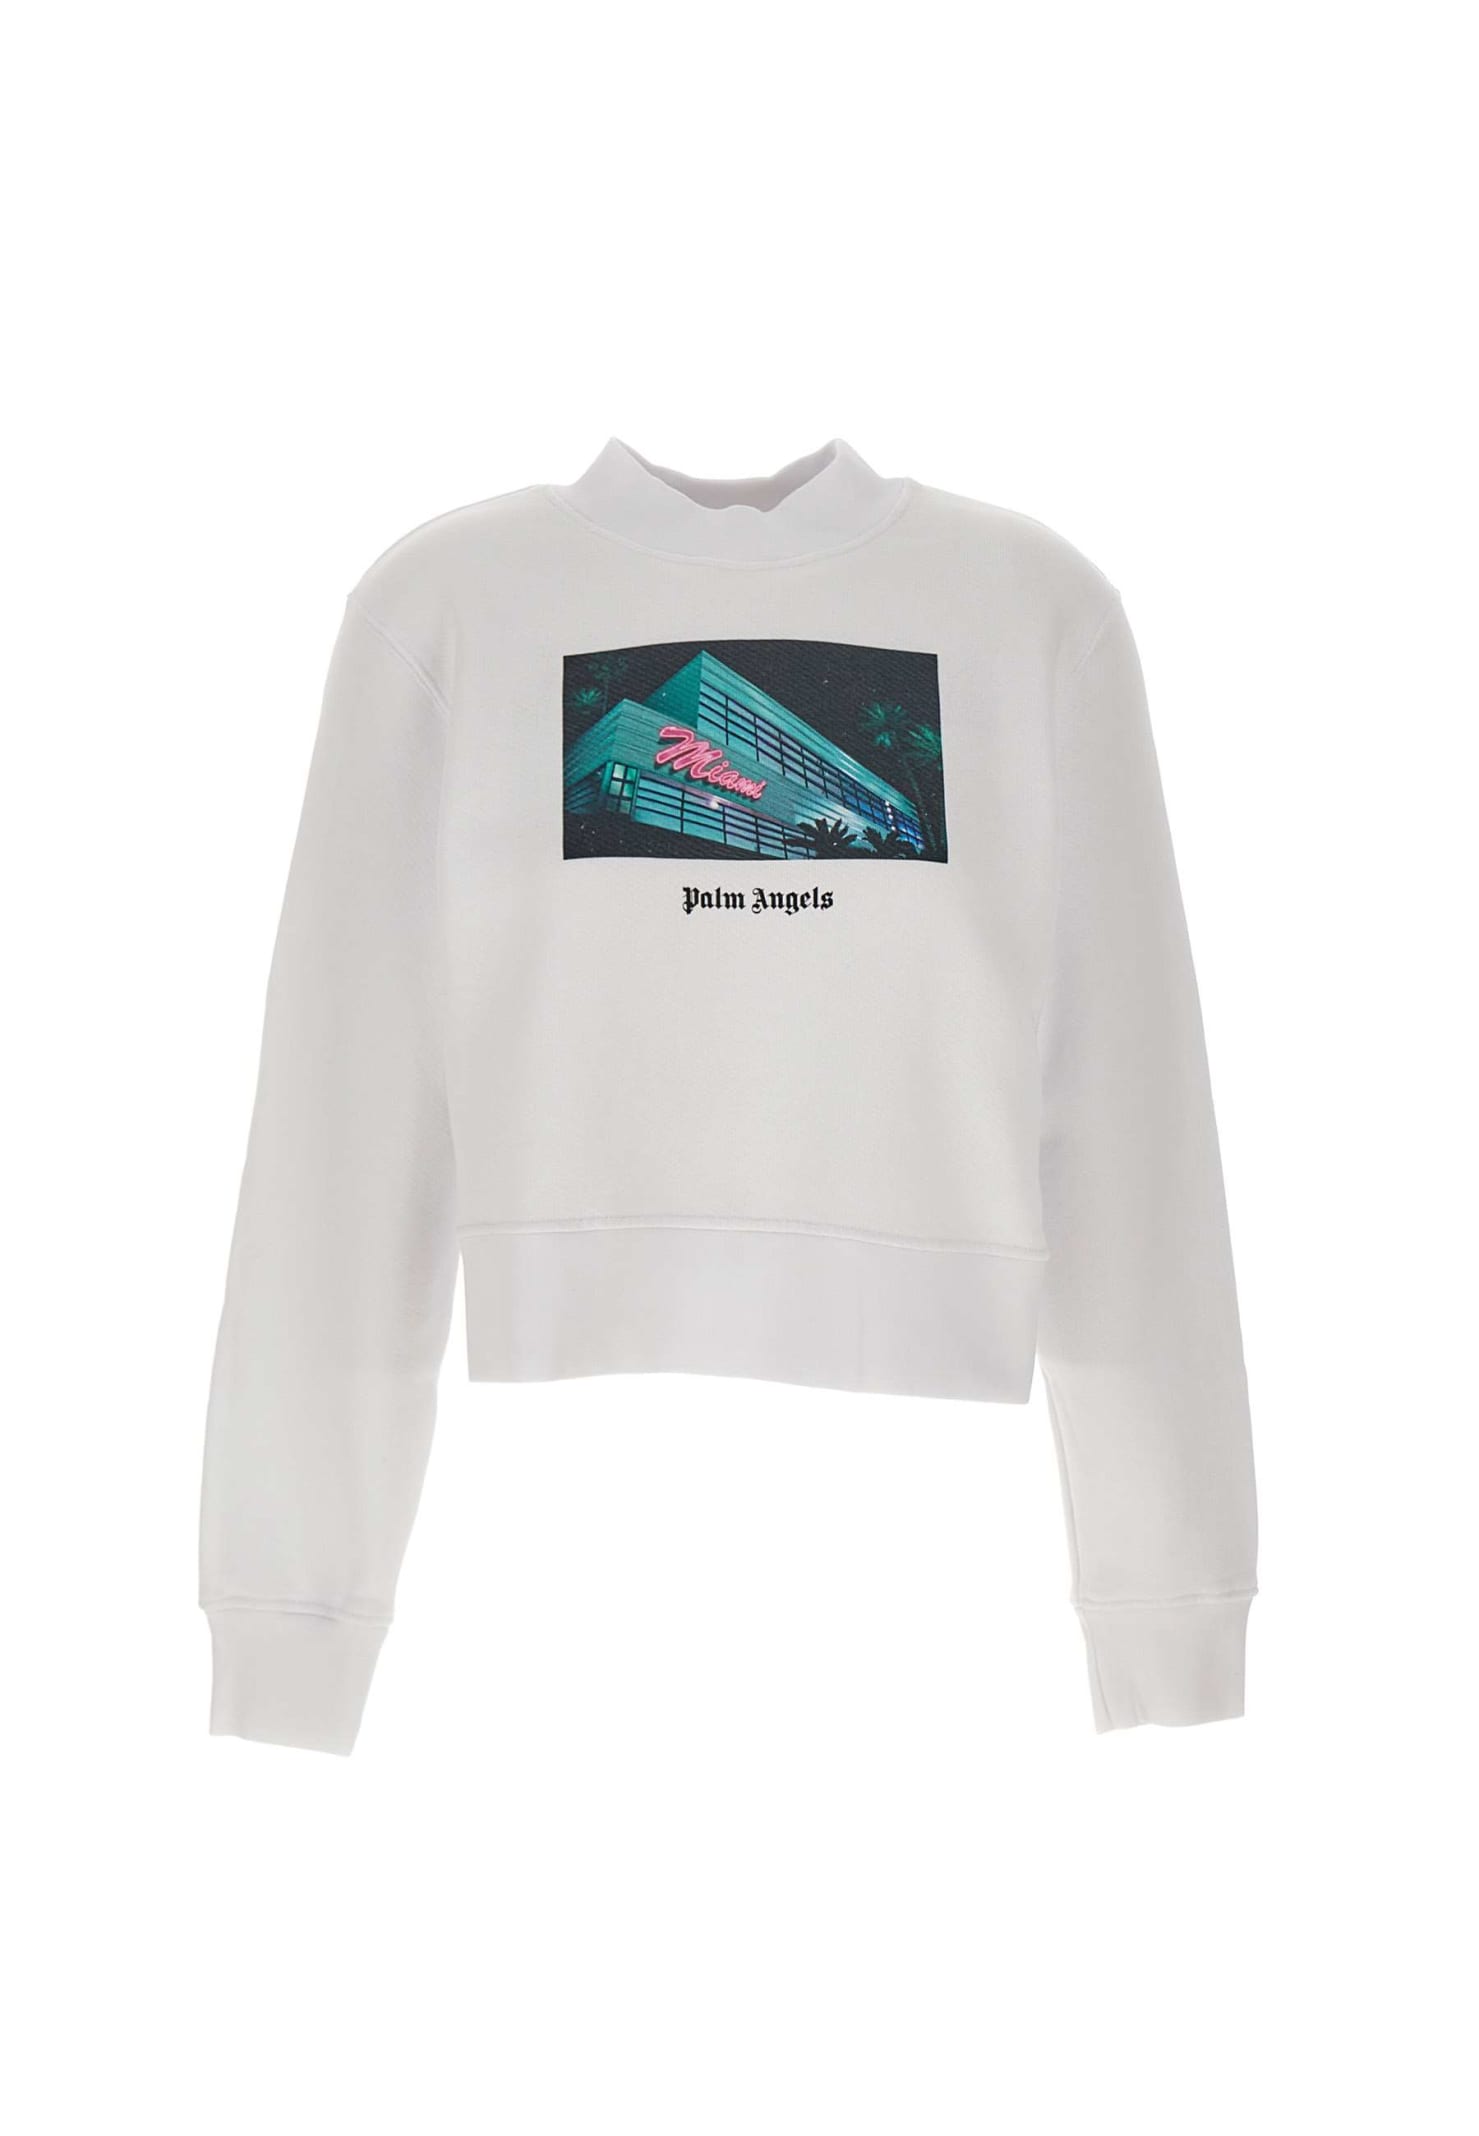 PALM ANGELS MIAMI FITTED SWEATSHIRT